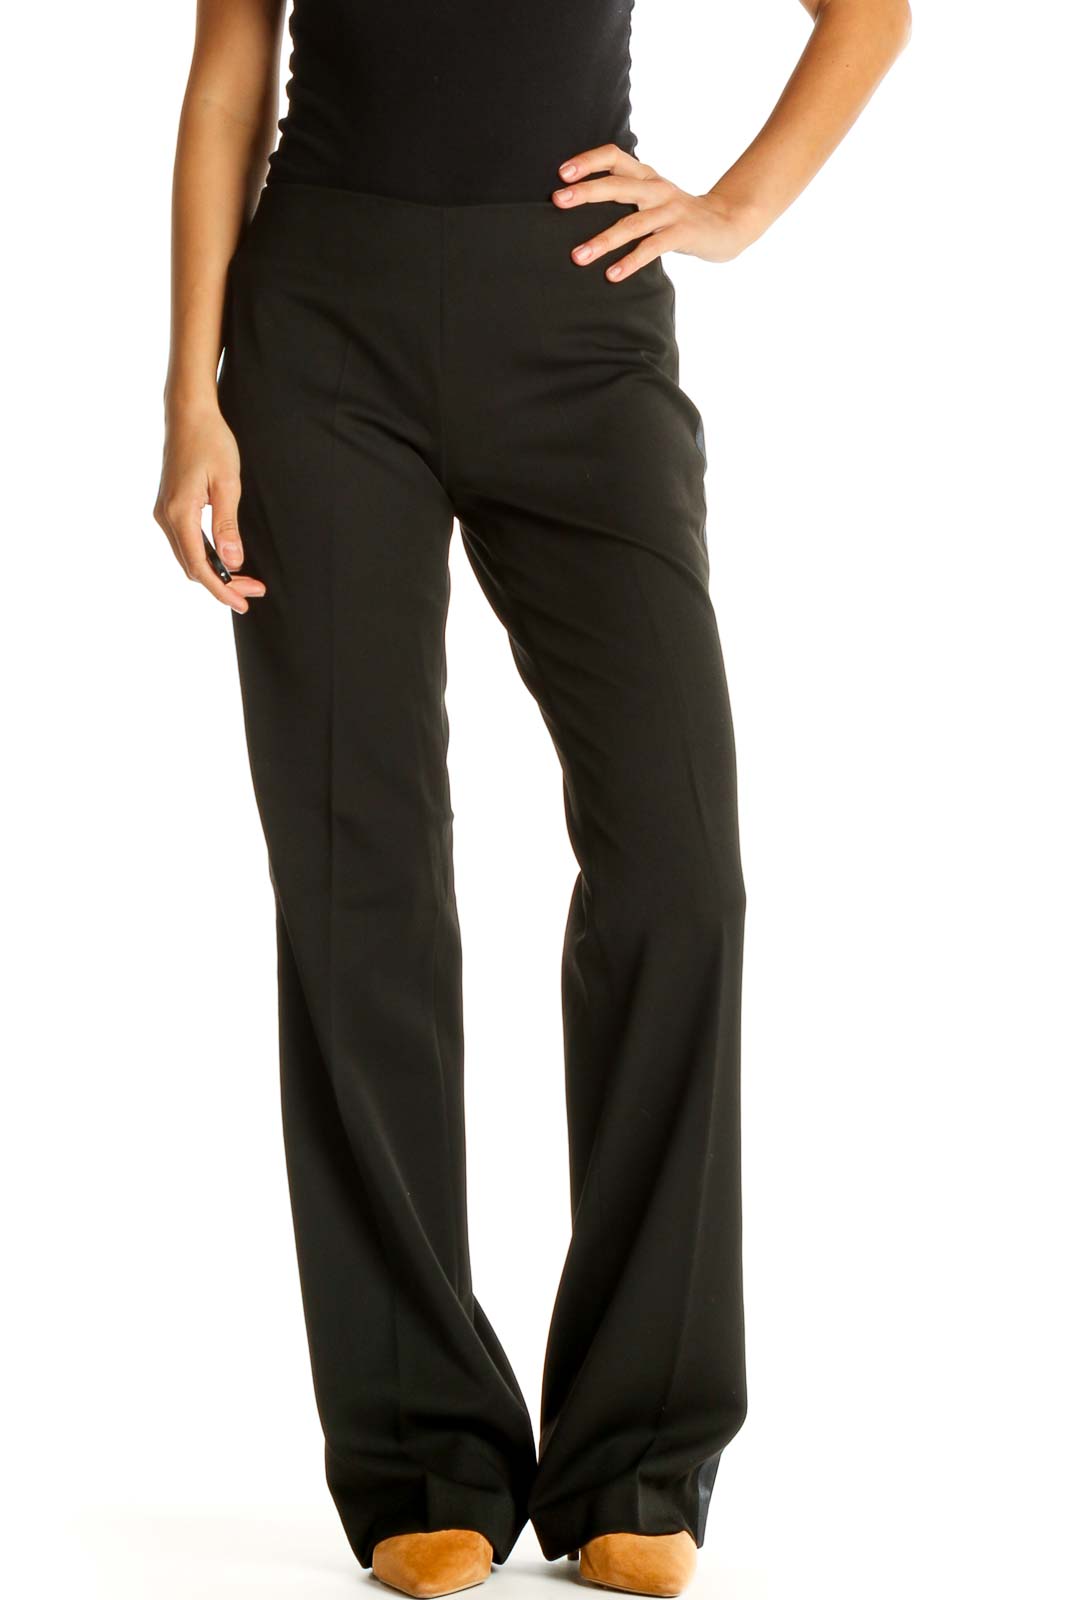 Black Solid Casual Pants Front